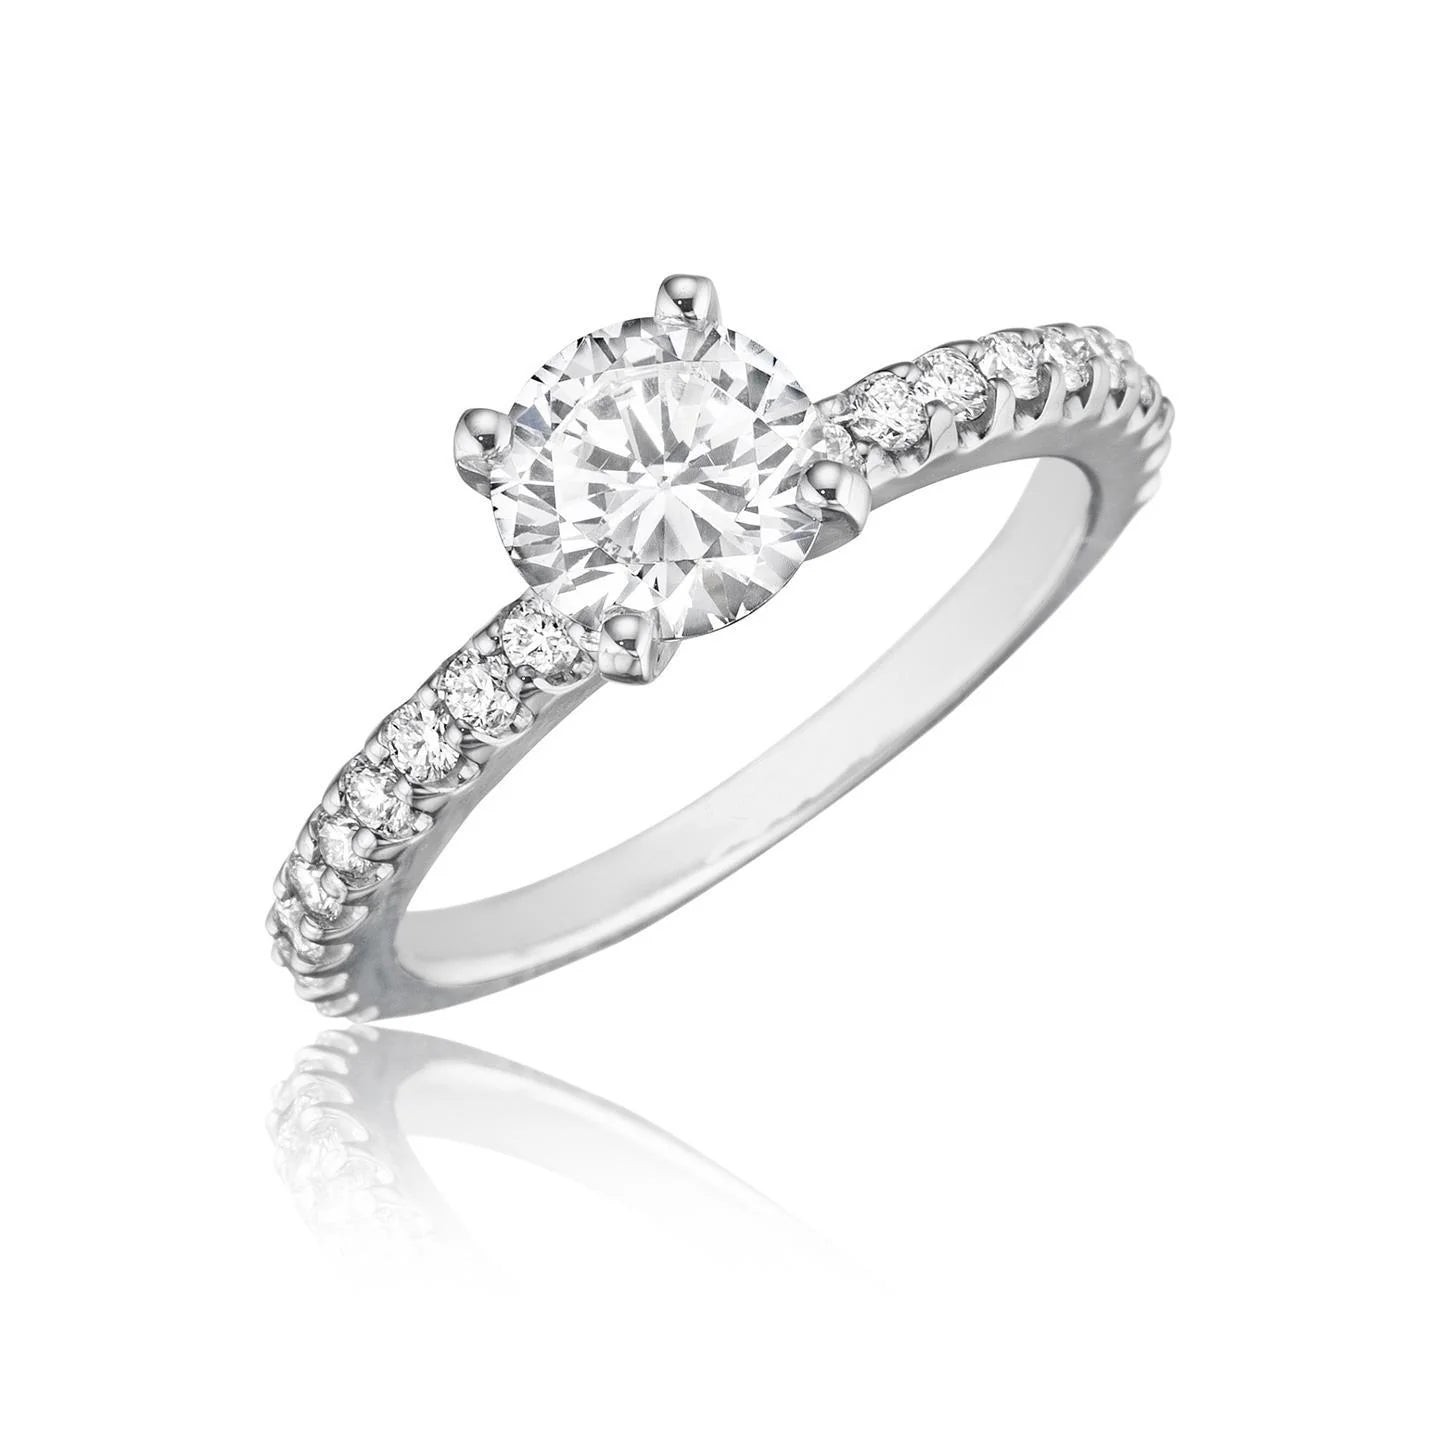 2.10 Carats Brilliant Cut Genuine Diamond Wedding Ring With Accents